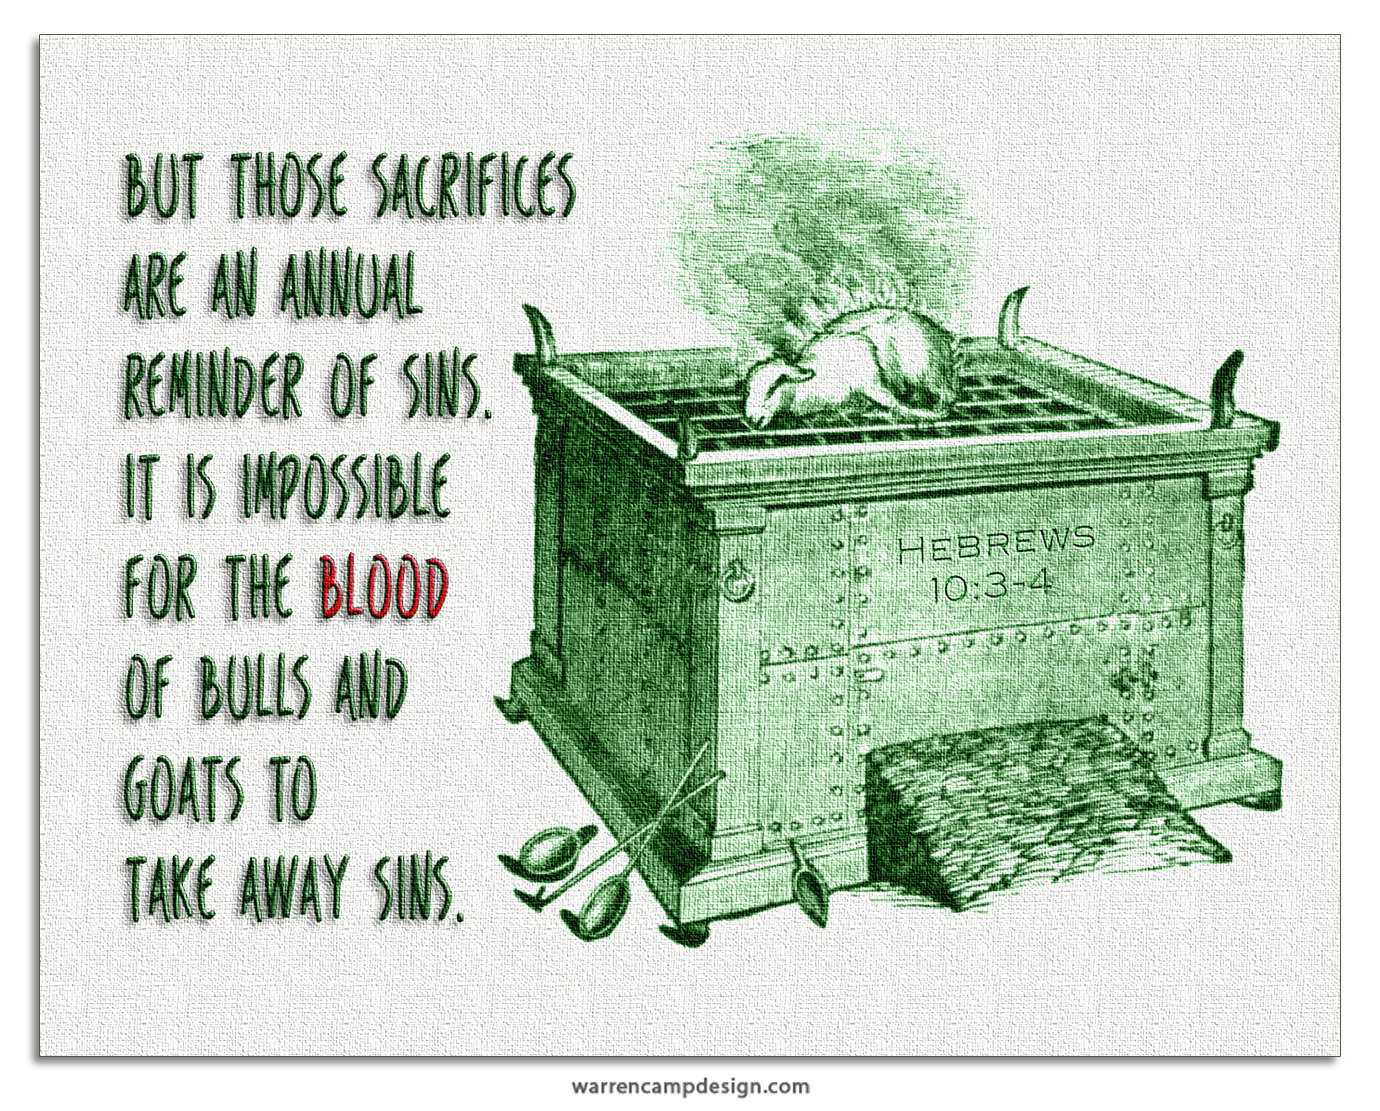 Warren Camp's Scripture picture of Hebrews 10:3-4, highlighting the fact that it's impossible for the blood of bulls and goats to take away sins